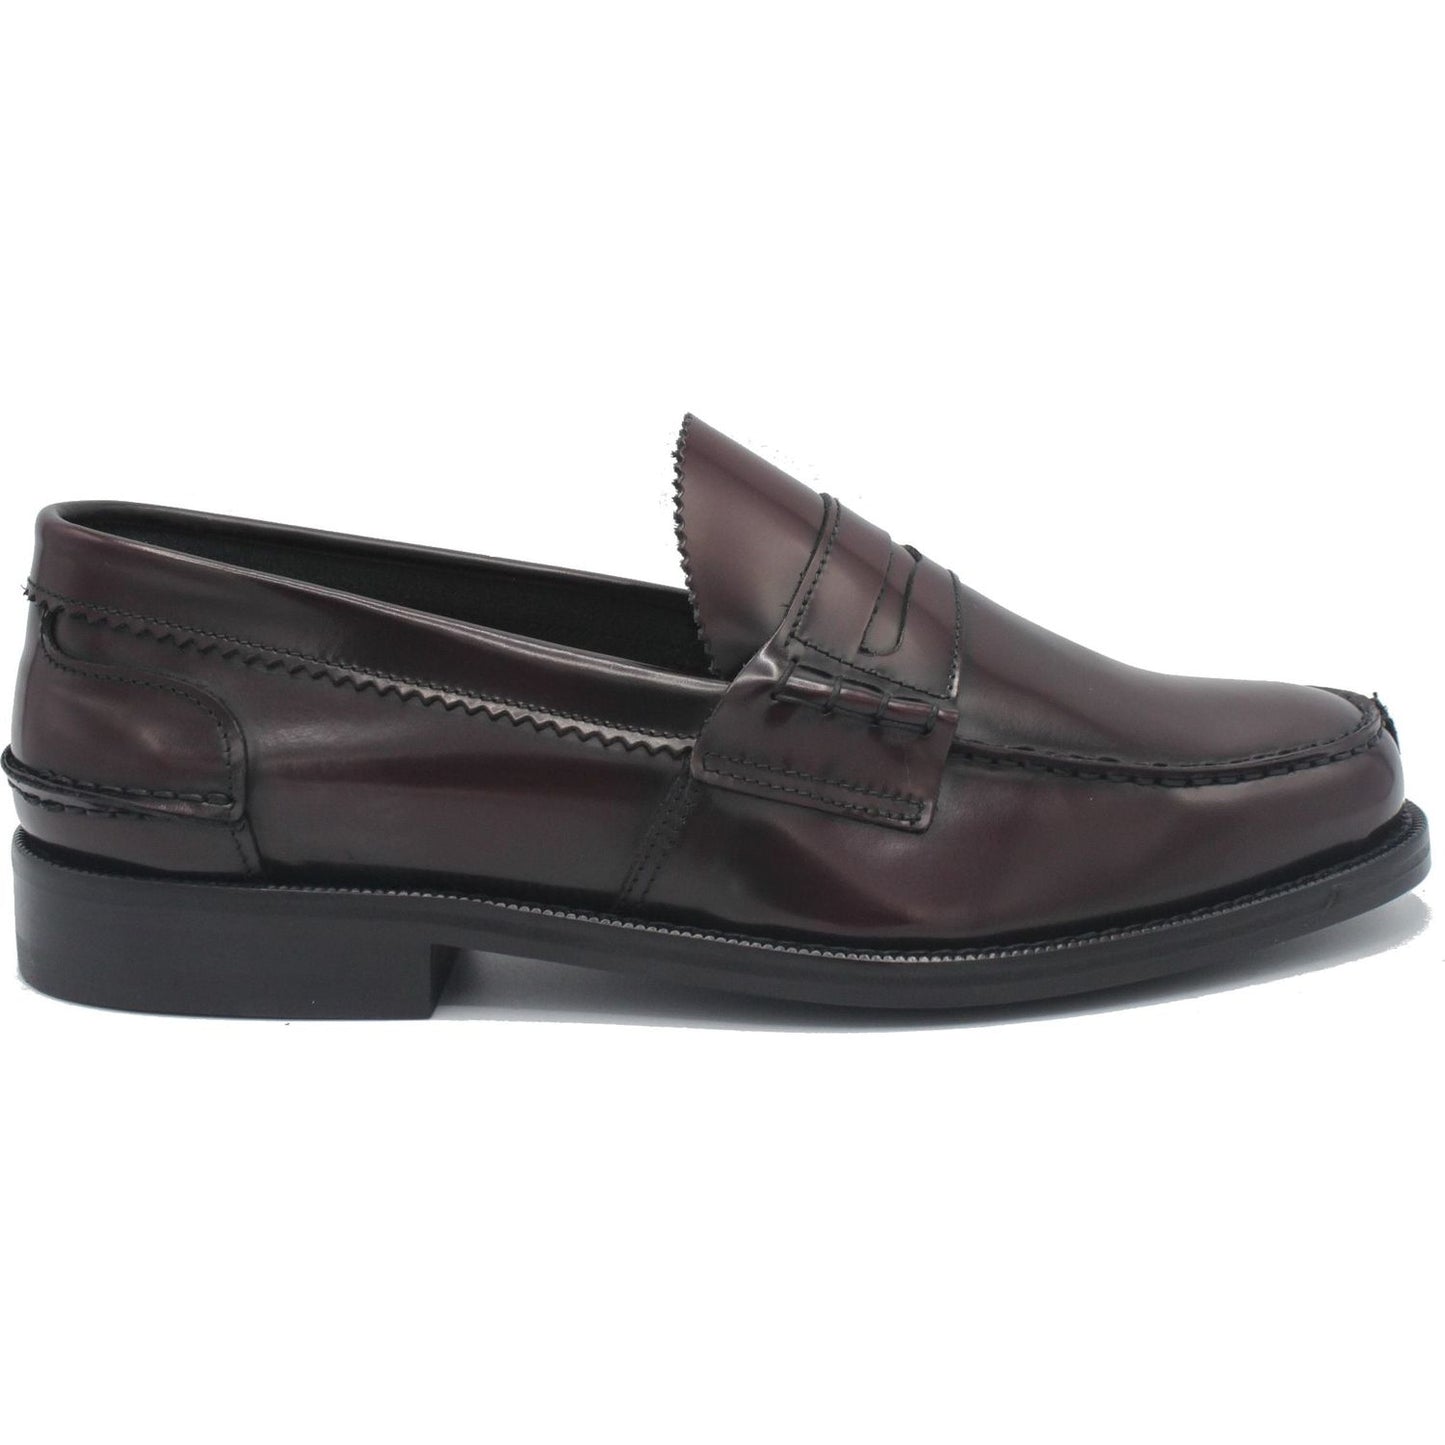 Saxone of Scotland Bordeaux Spazzolato Leather Mens Loafers Shoes bordeaux-spazzolato-leather-mens-loafers-shoes